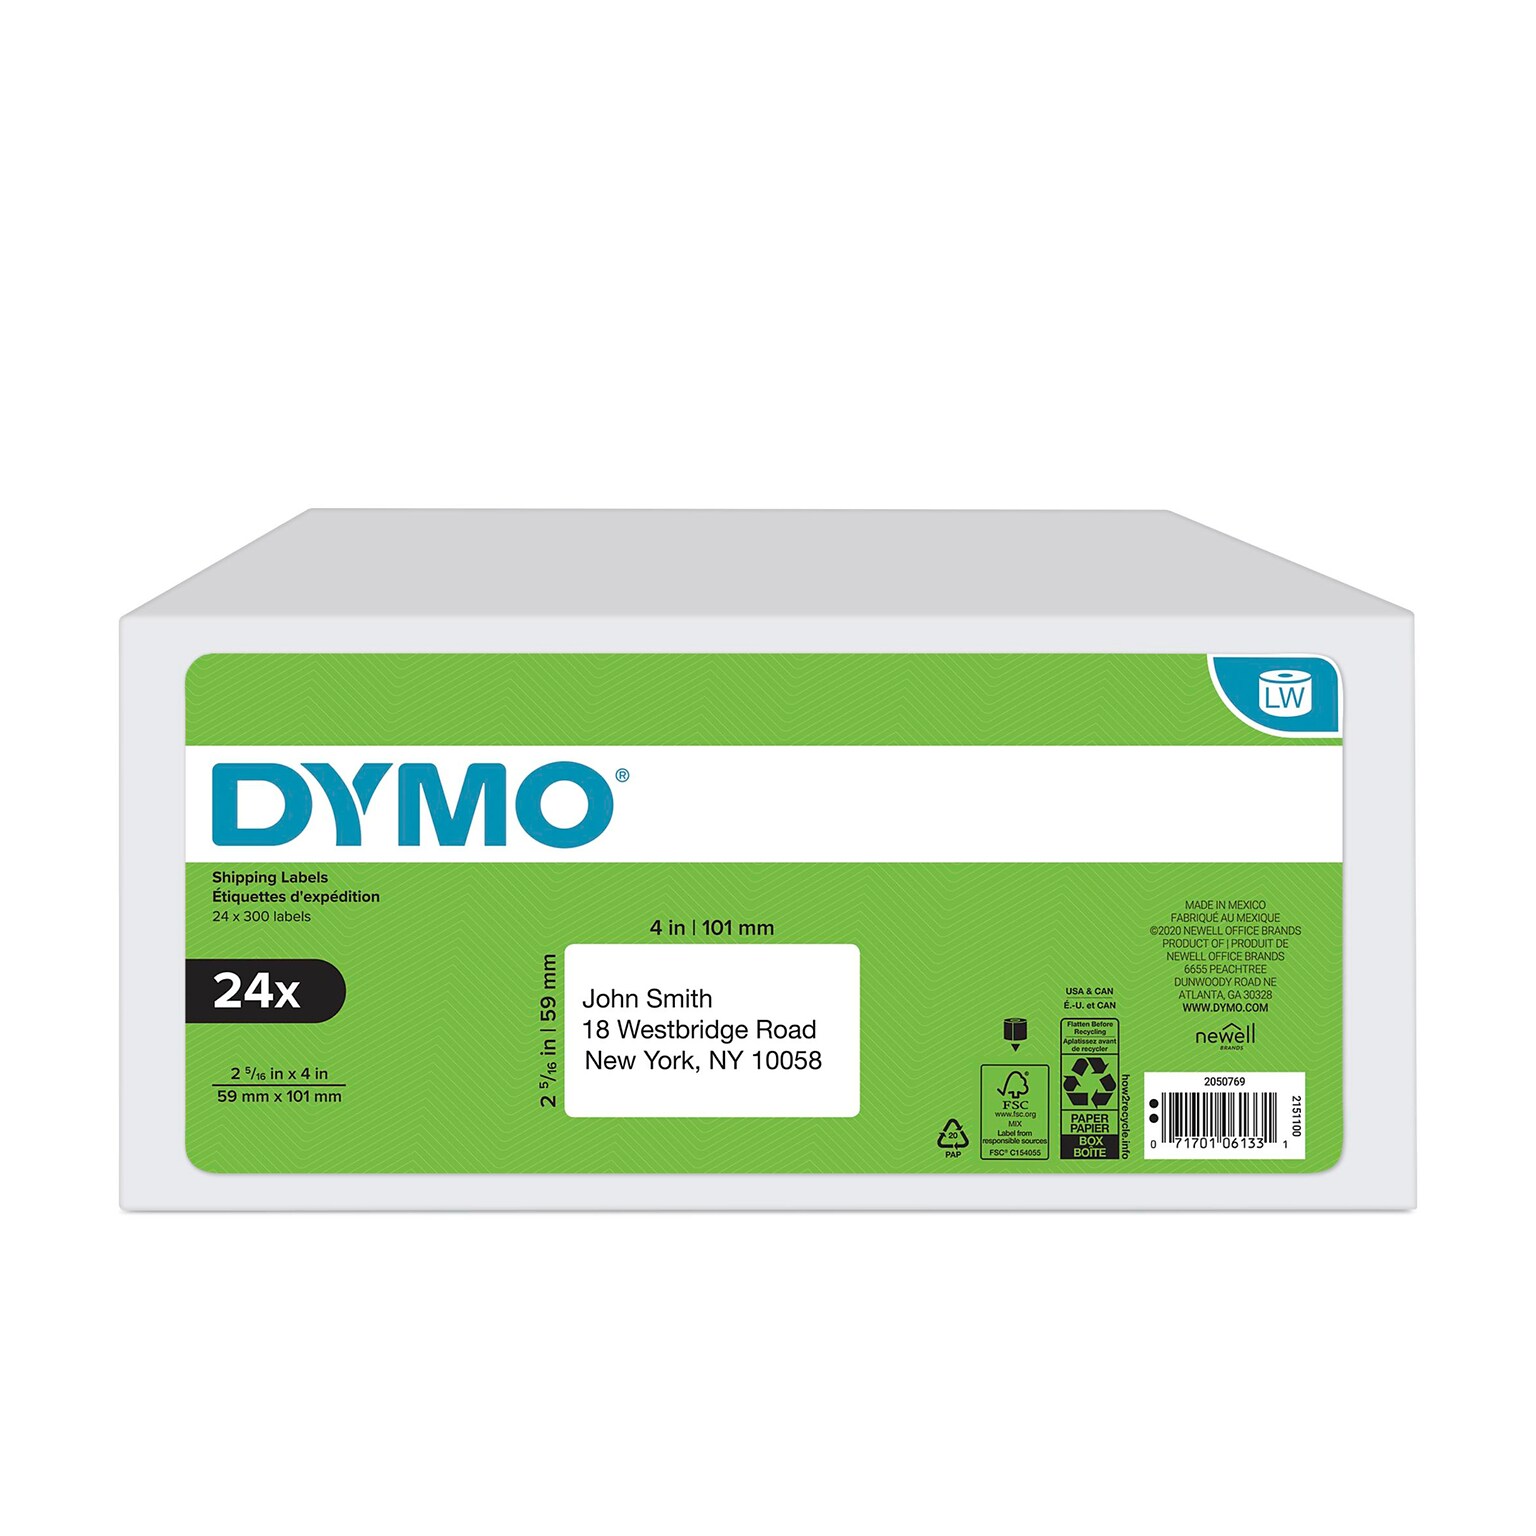 DYMO LabelWriter 2050769 Shipping Labels, 4 x 2-5/16, Black on White, 300 Labels/Roll, 24 Rolls/Box (2050769)